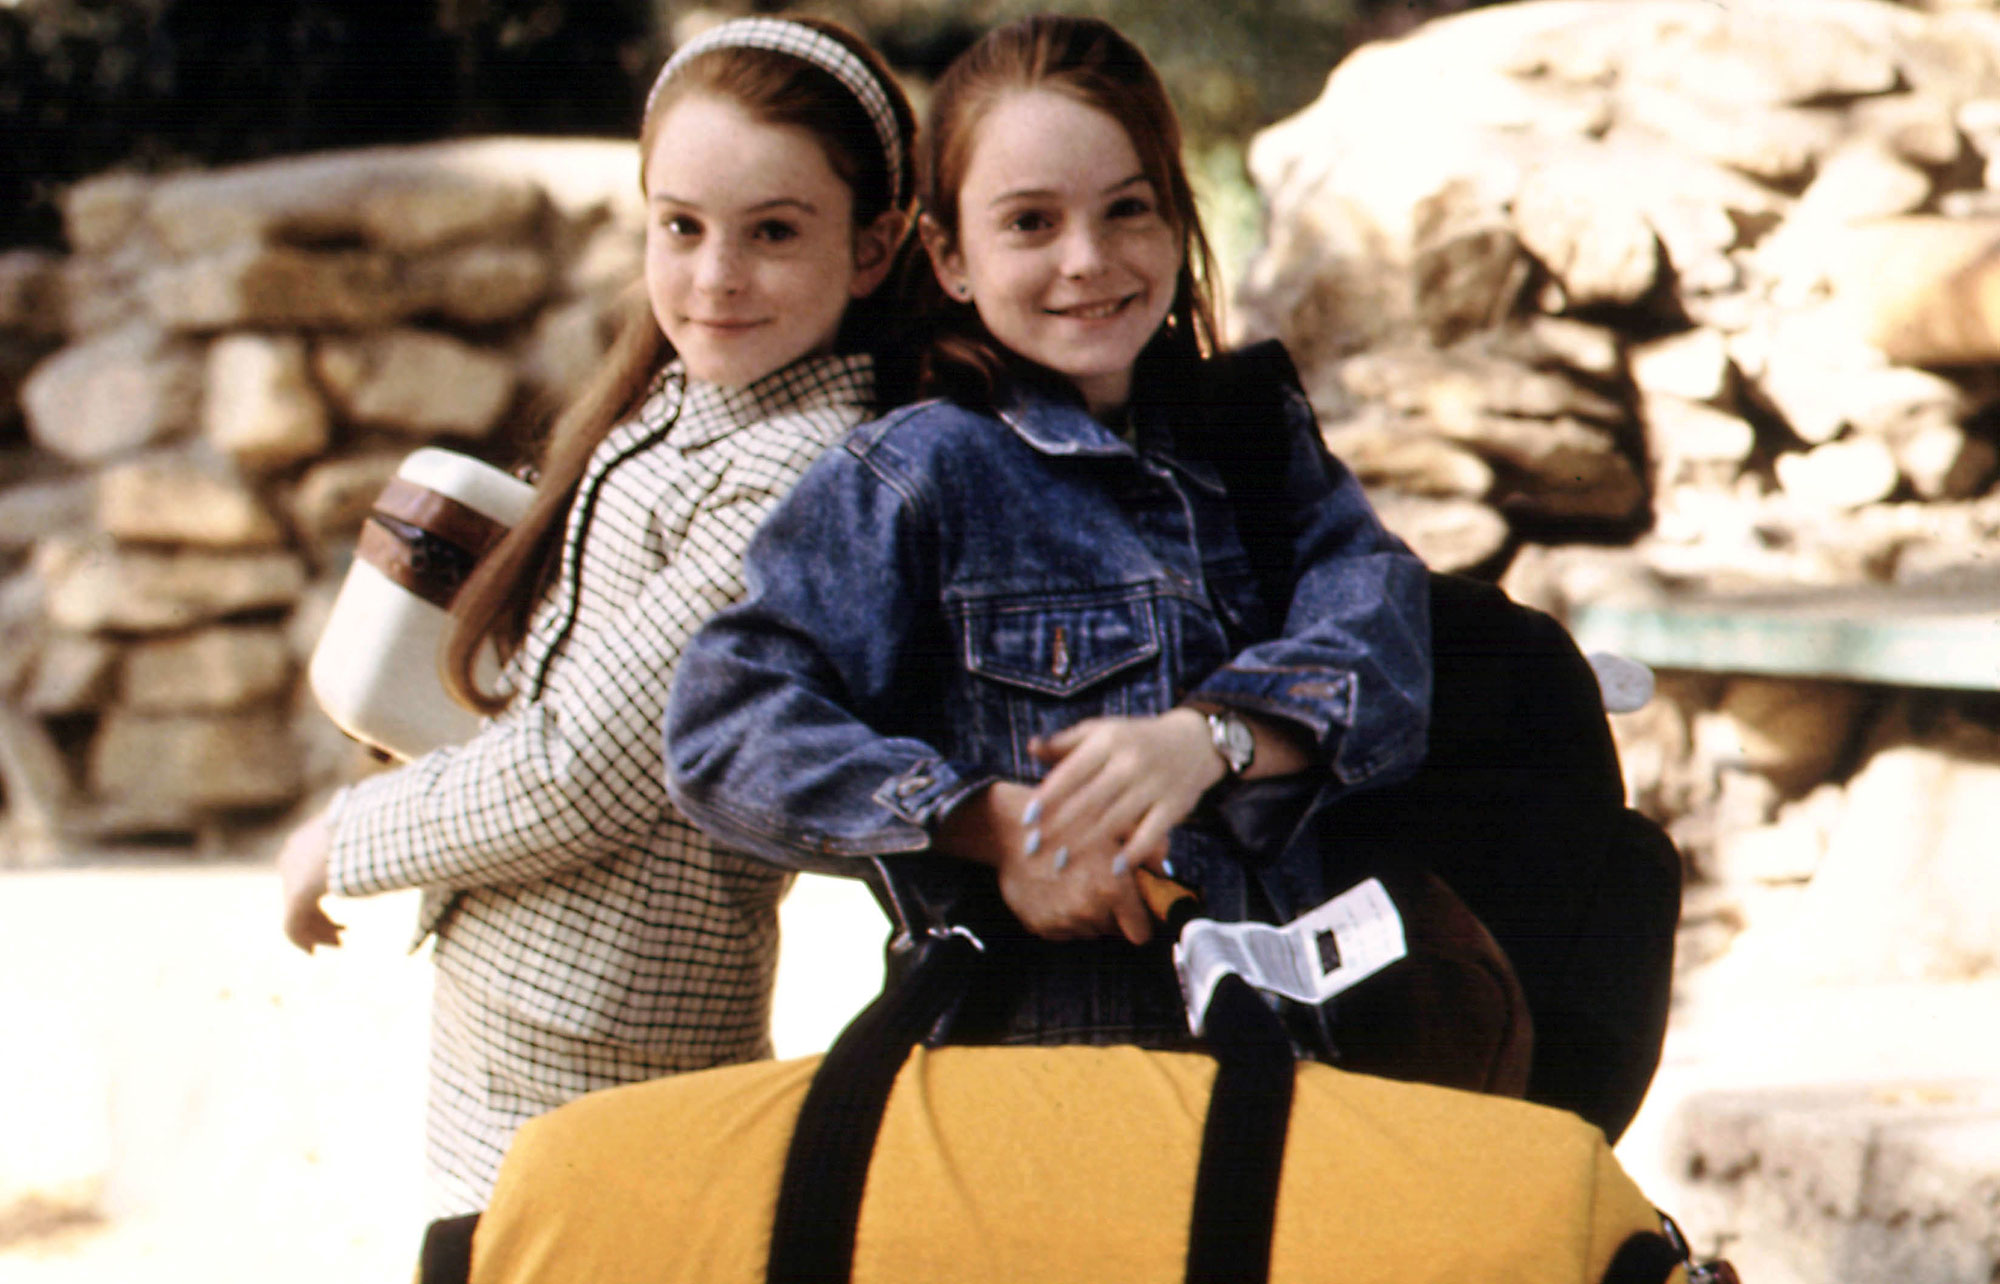 The Parent Trap 1998 Cast Where Are They Now?